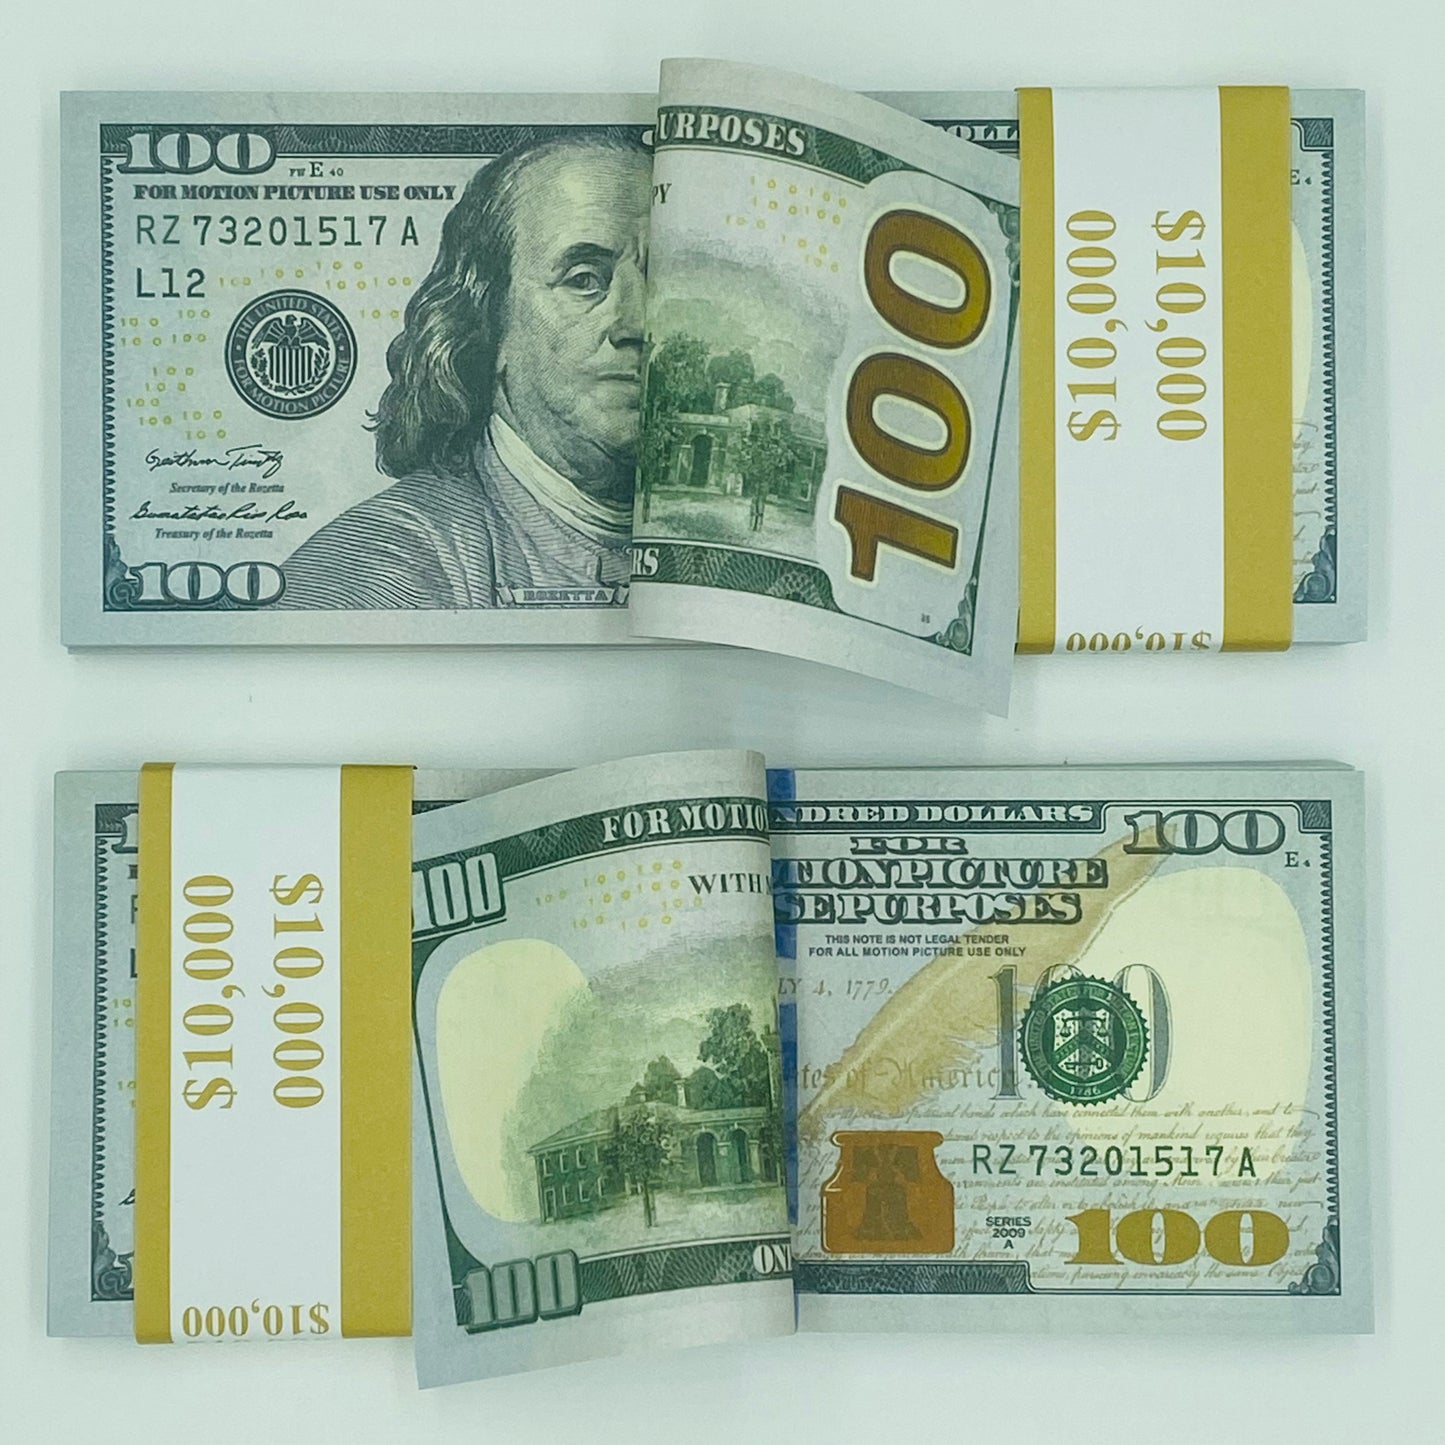 200 Pcs $100 Prop Movie Money Replica Double Sided Looks Real Full Printed